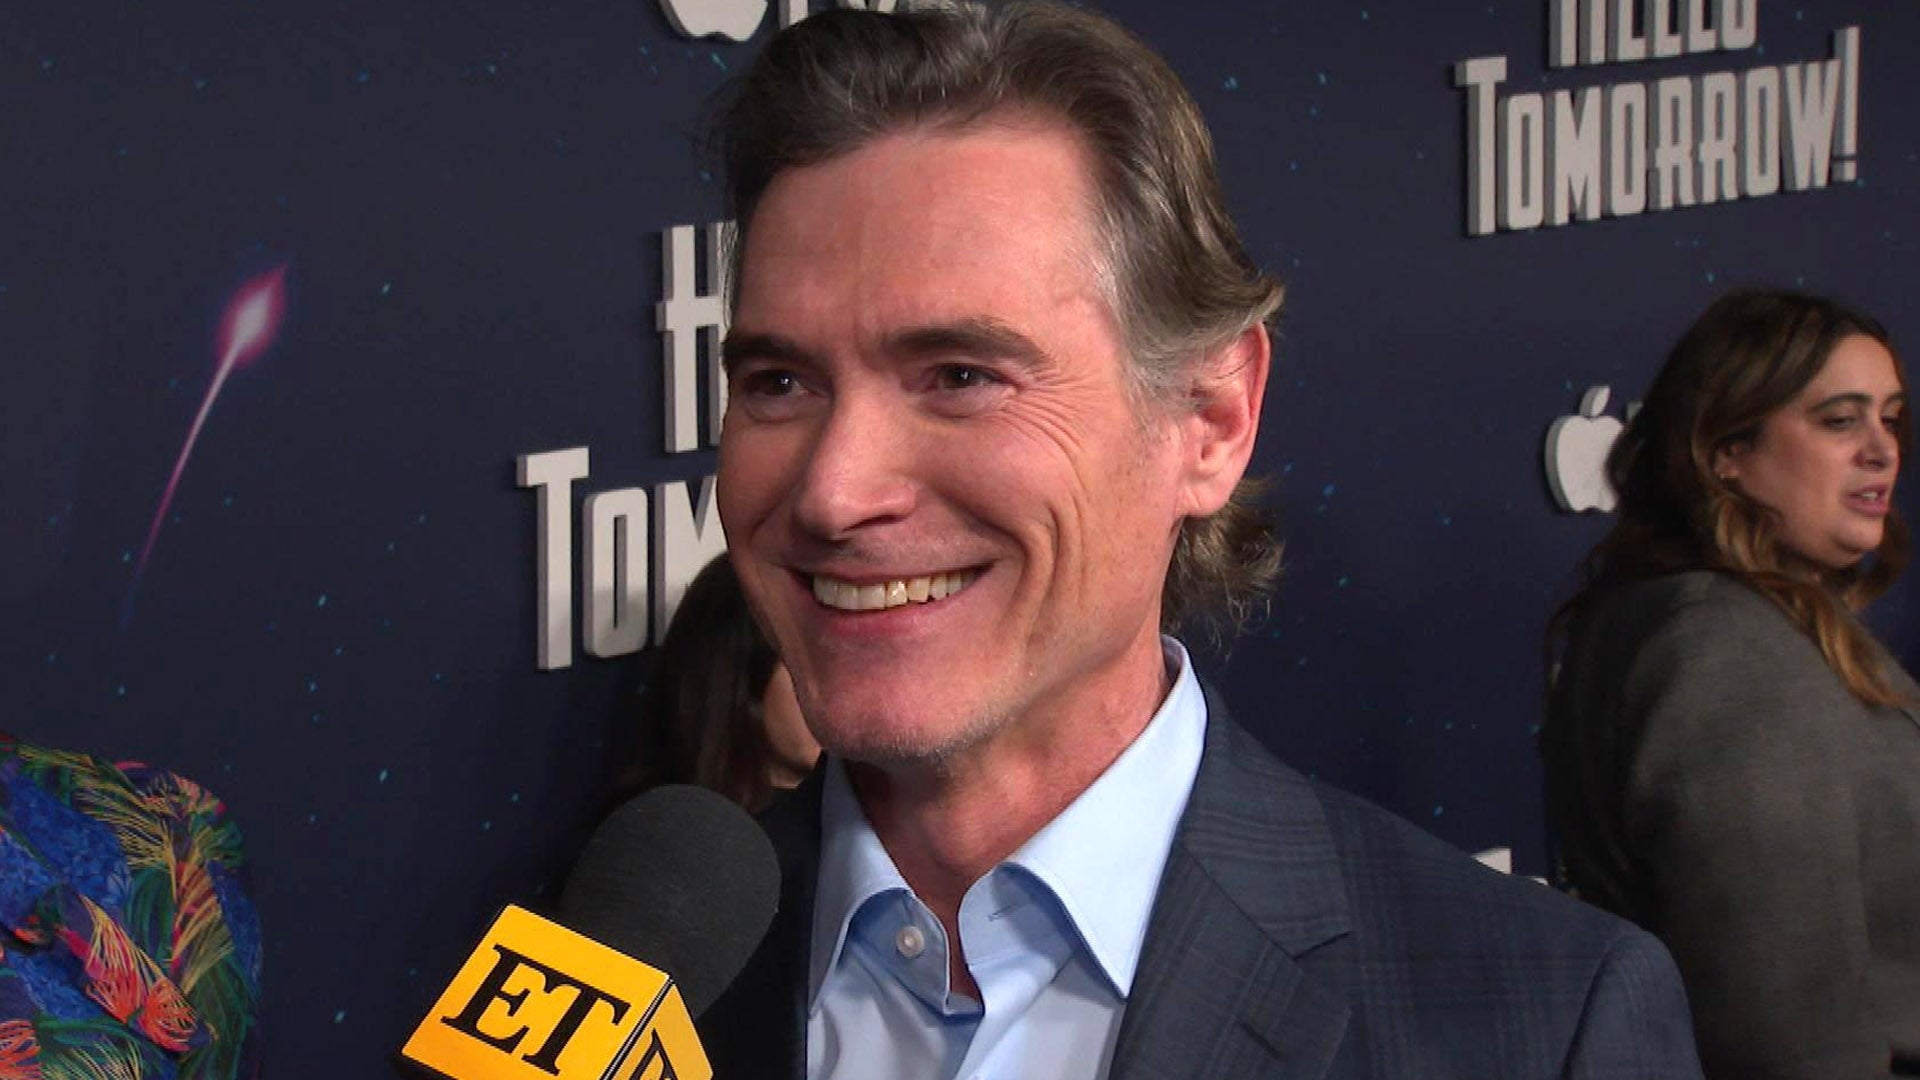 Billy Crudup on Kate Hudson Calling Him a More ‘Sophisticated’ Kisser Than Matthew McConaughey